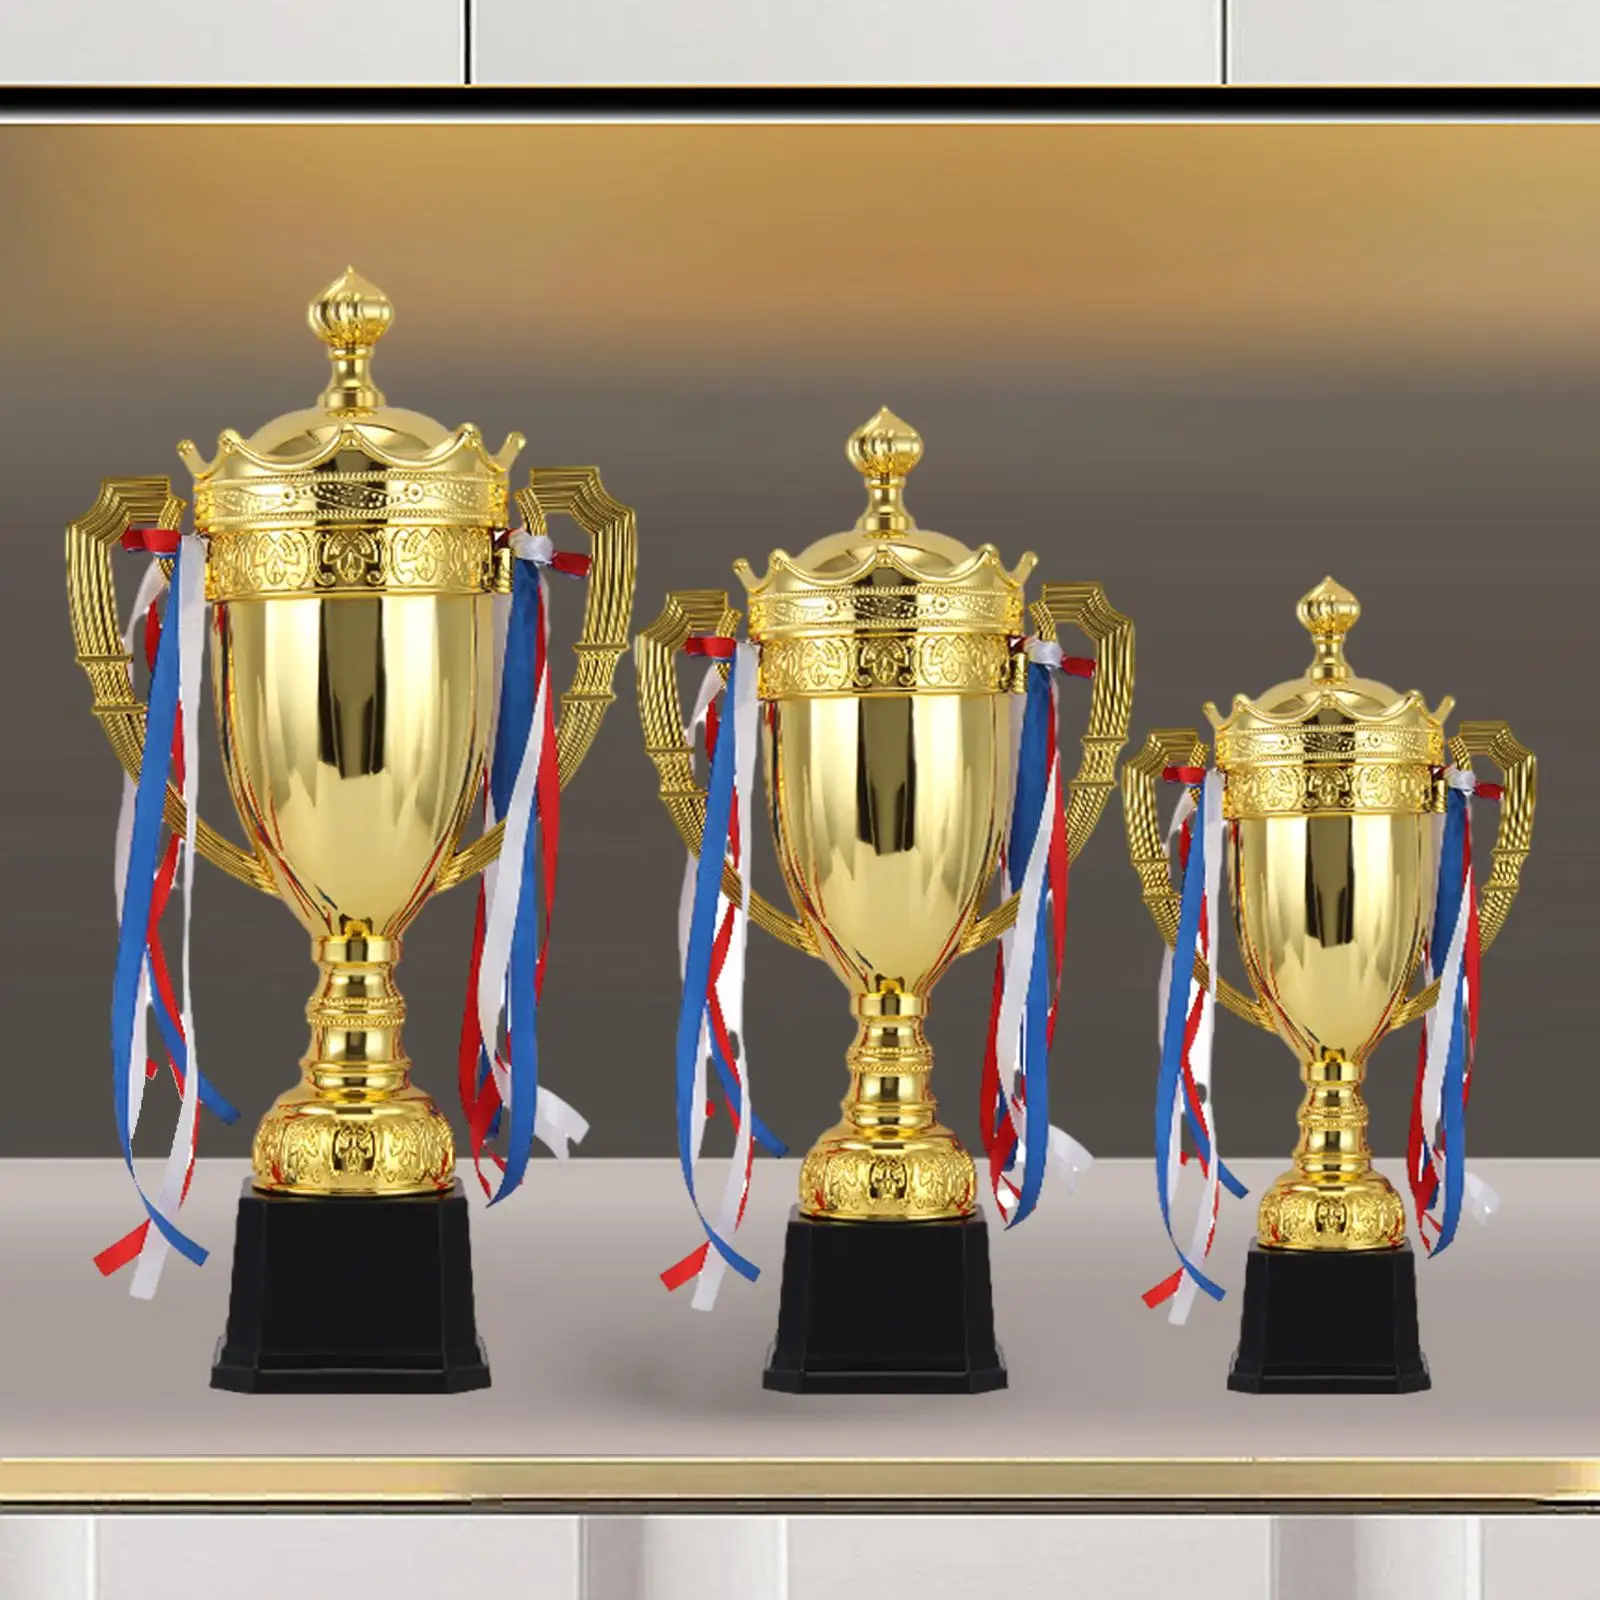 Award Trophy Cup Trophy for Kids for Sports Championships Rewards Football - 2